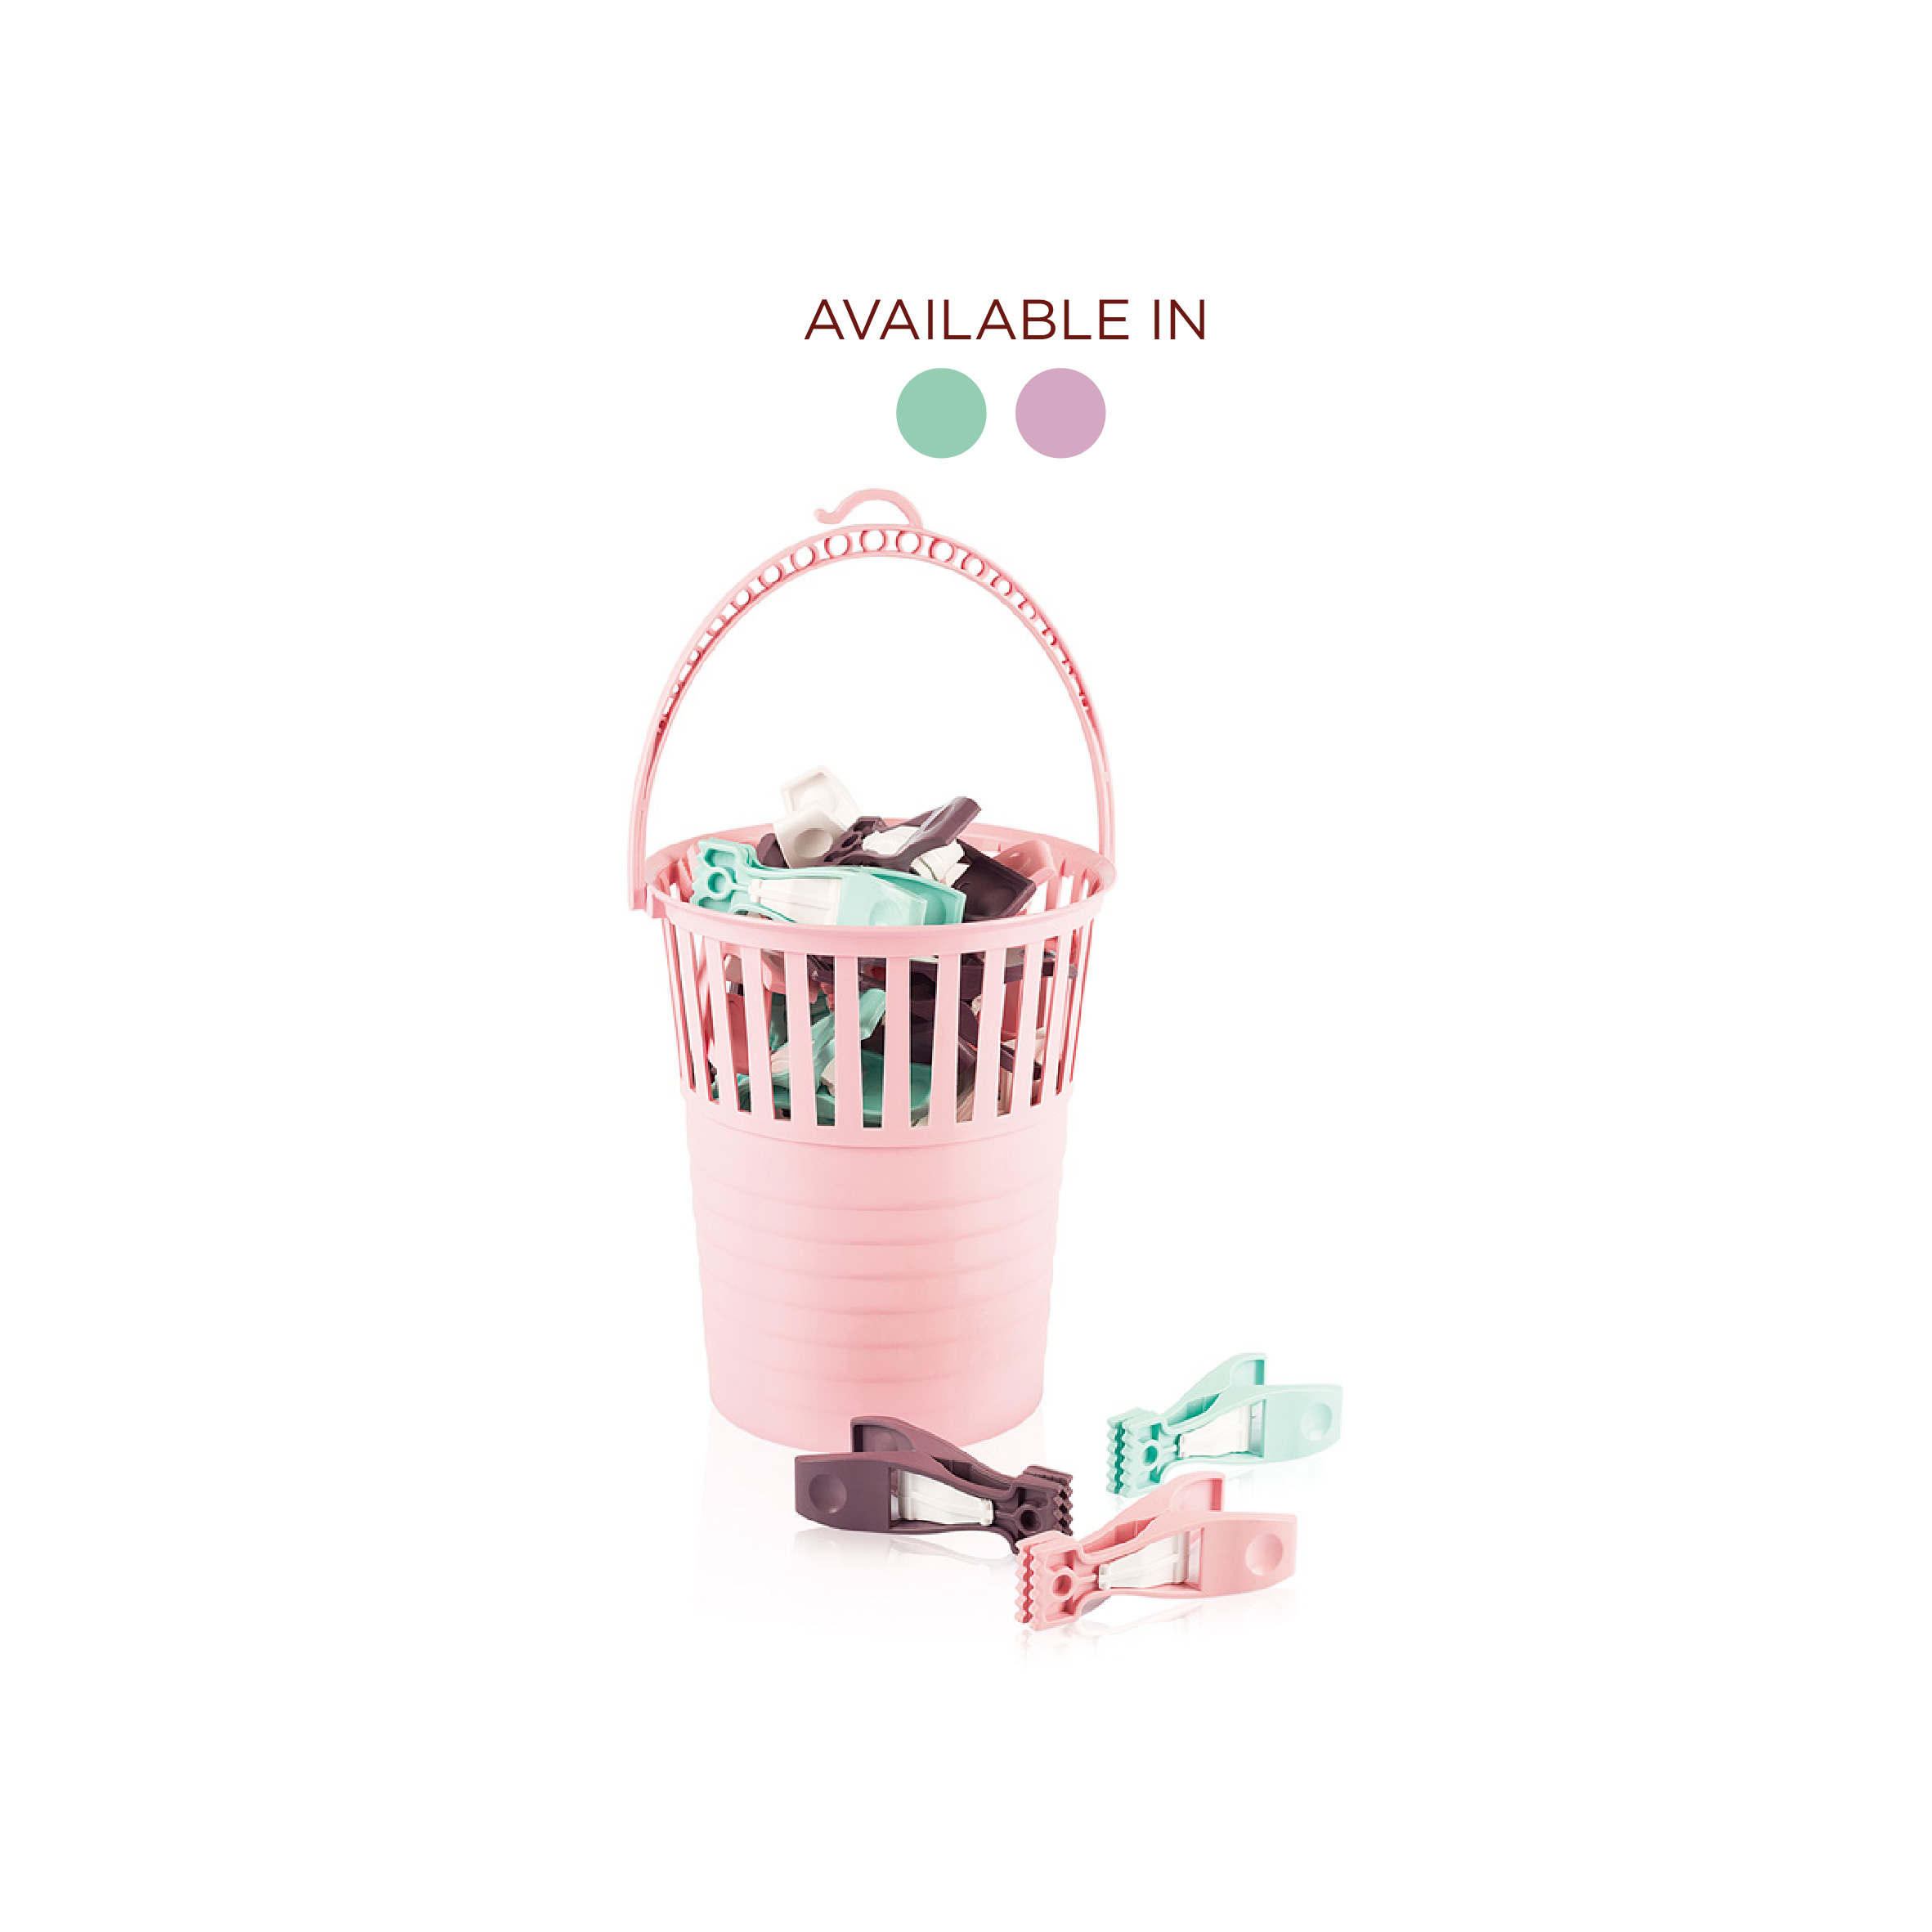 Urve Clothes Peg In Basket (Available in Blue / Pink), UR-3278